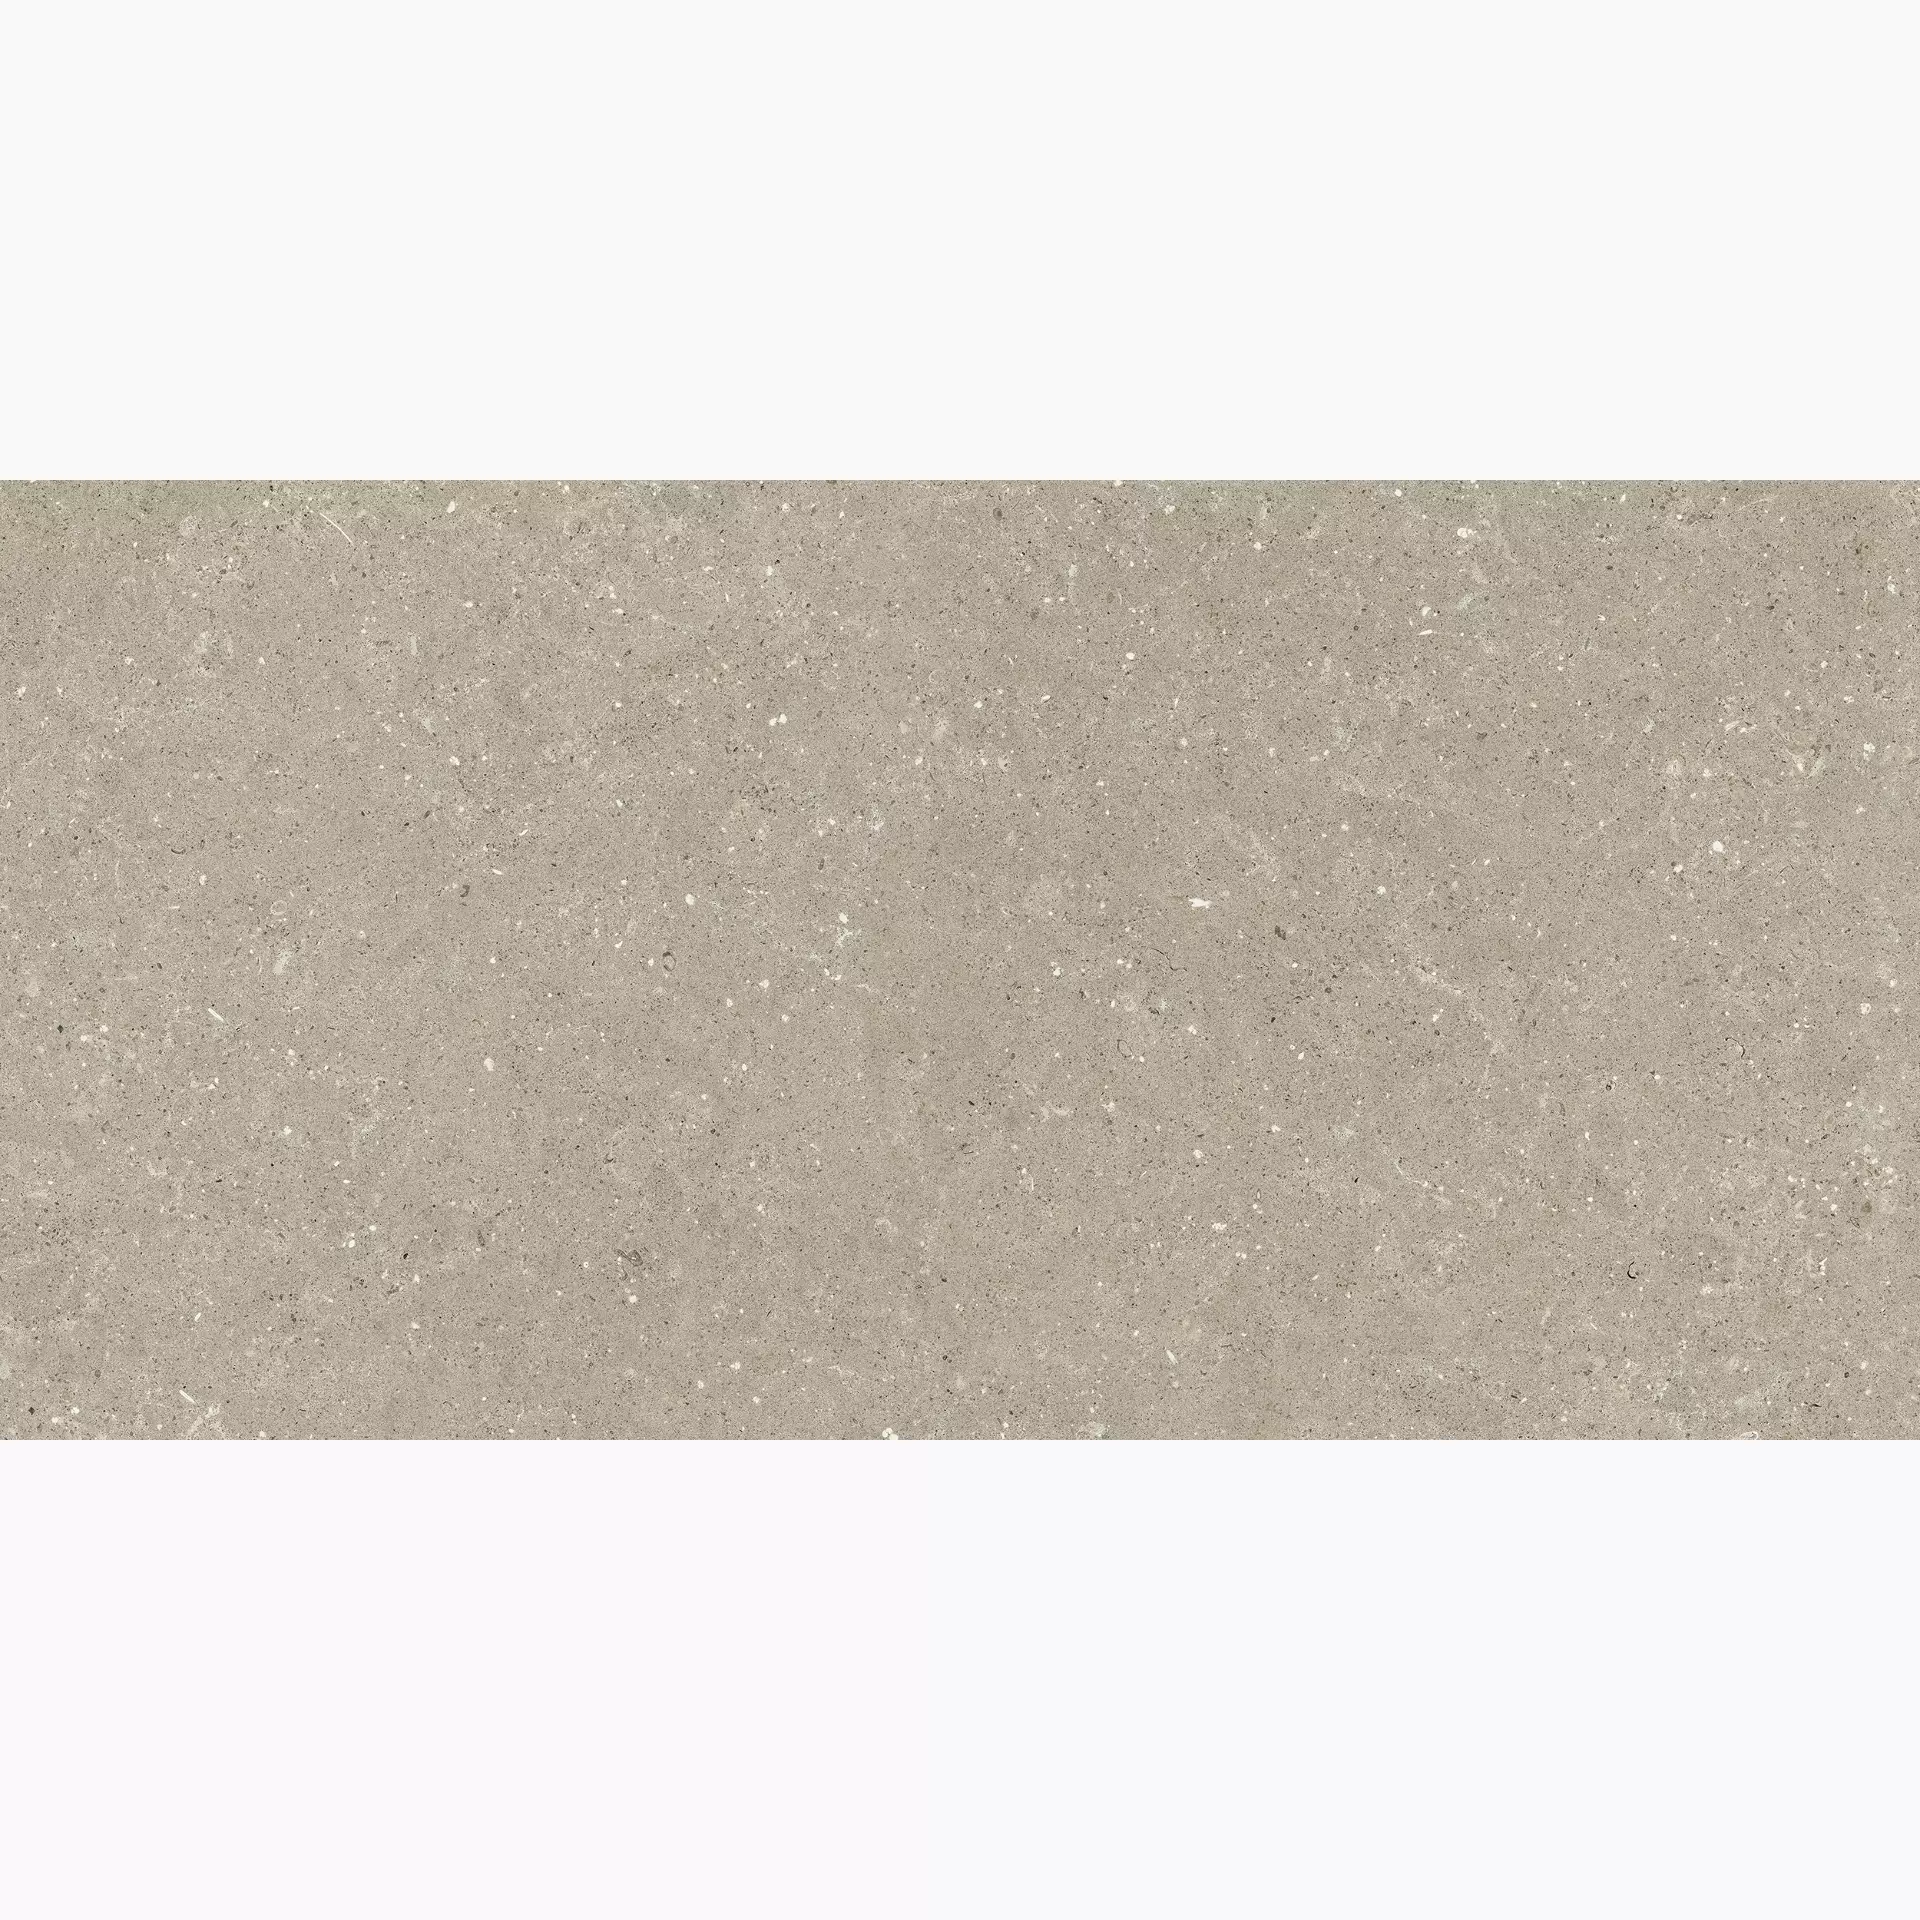 Del Conca Hwd2 Wild2 Greige Hwd211 Naturale SCWD11R 60x120cm rectified 20mm